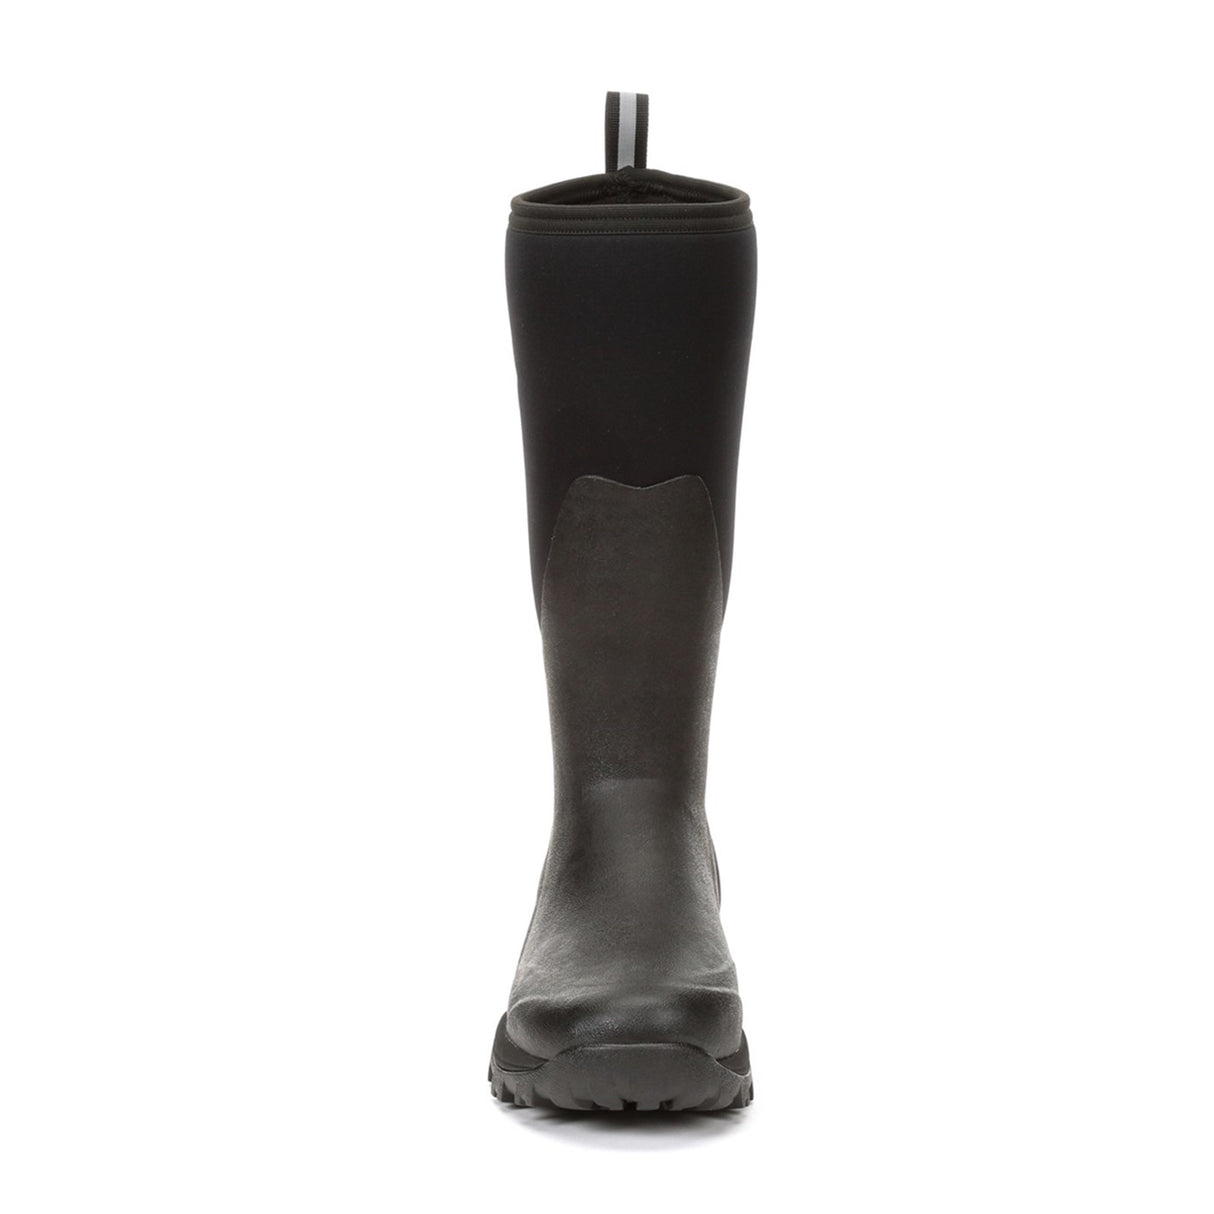 Men's Arctic Outpost Tall Boots Black